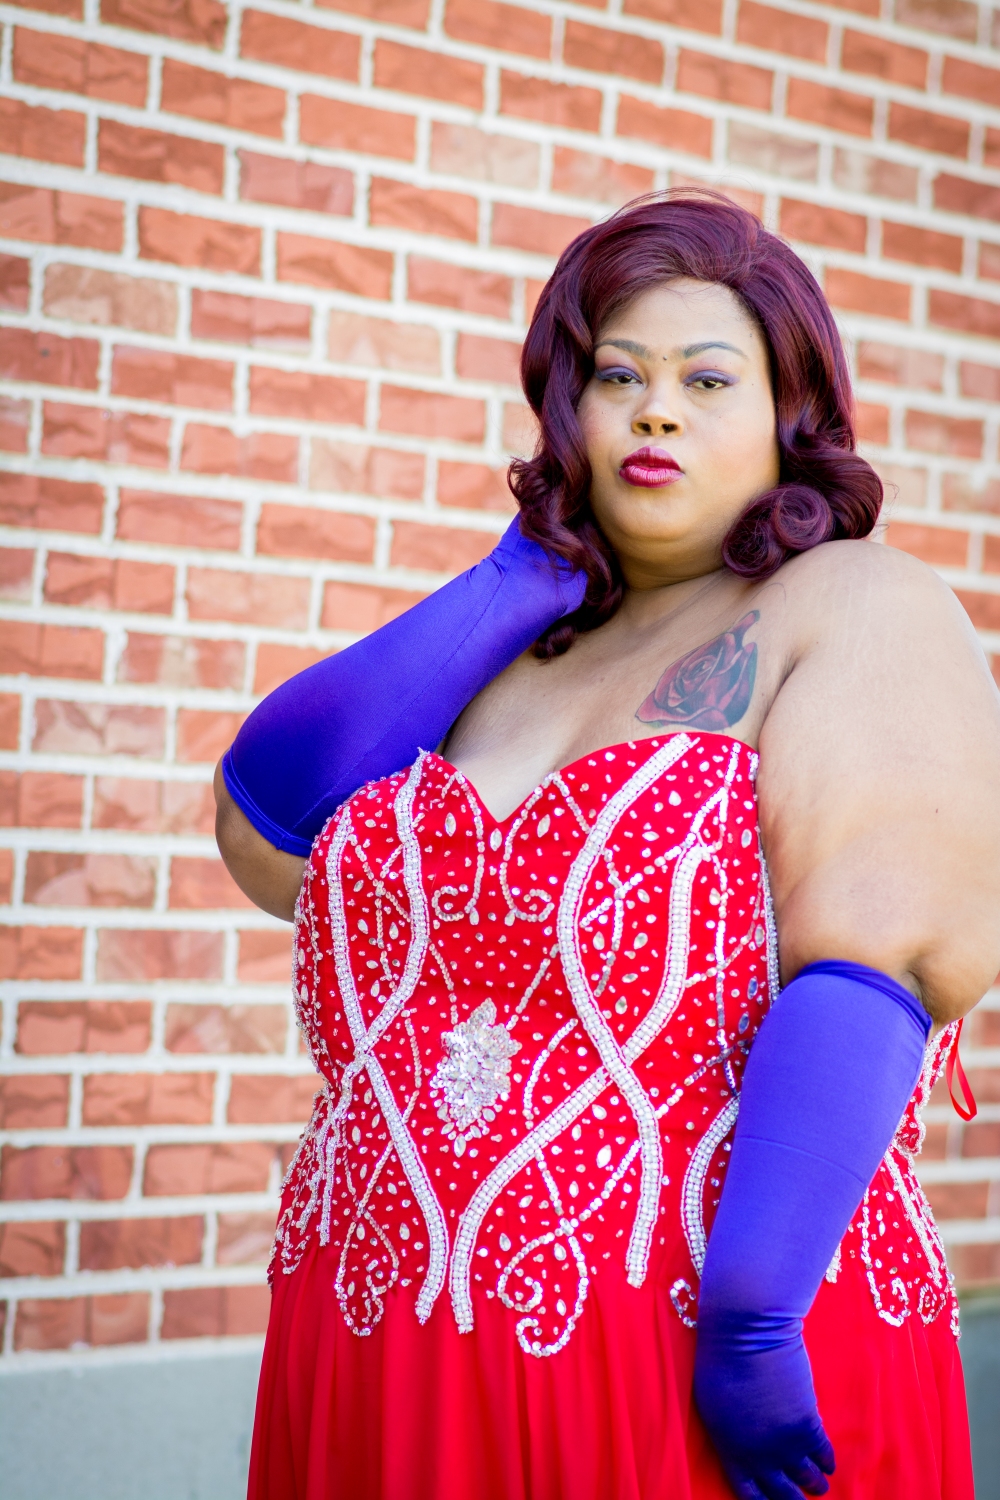 repurpose your plus size prom dress into a DIY halloween costume via http://finessecurves.com